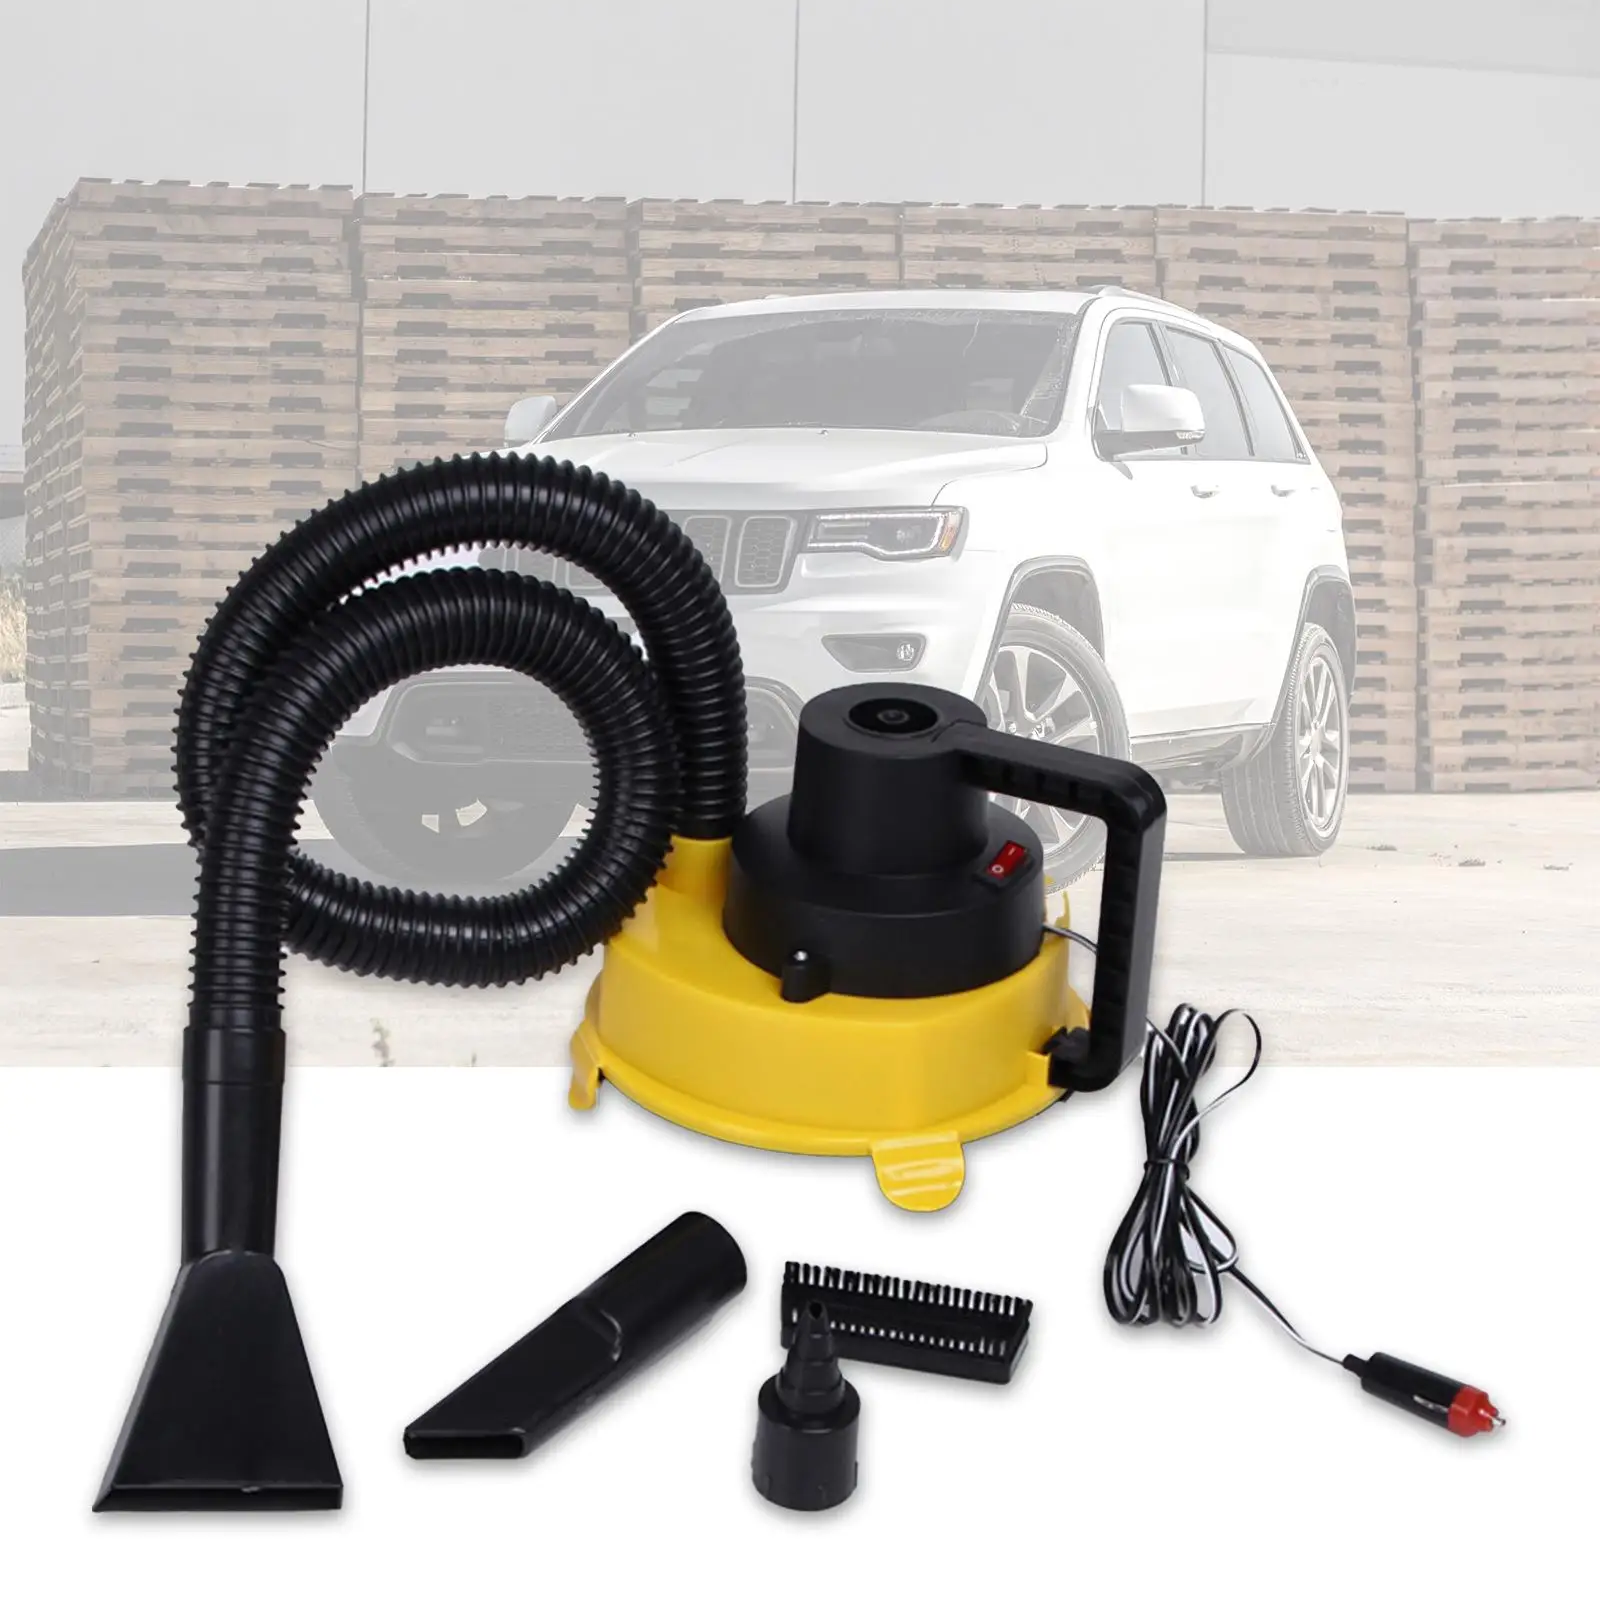 Car Vacuum Cleaner 12V Quick Cleaning Home Car Dual Use Portable Vacuum Cleaner Handheld Duster Dust Buster for Vehicle RV